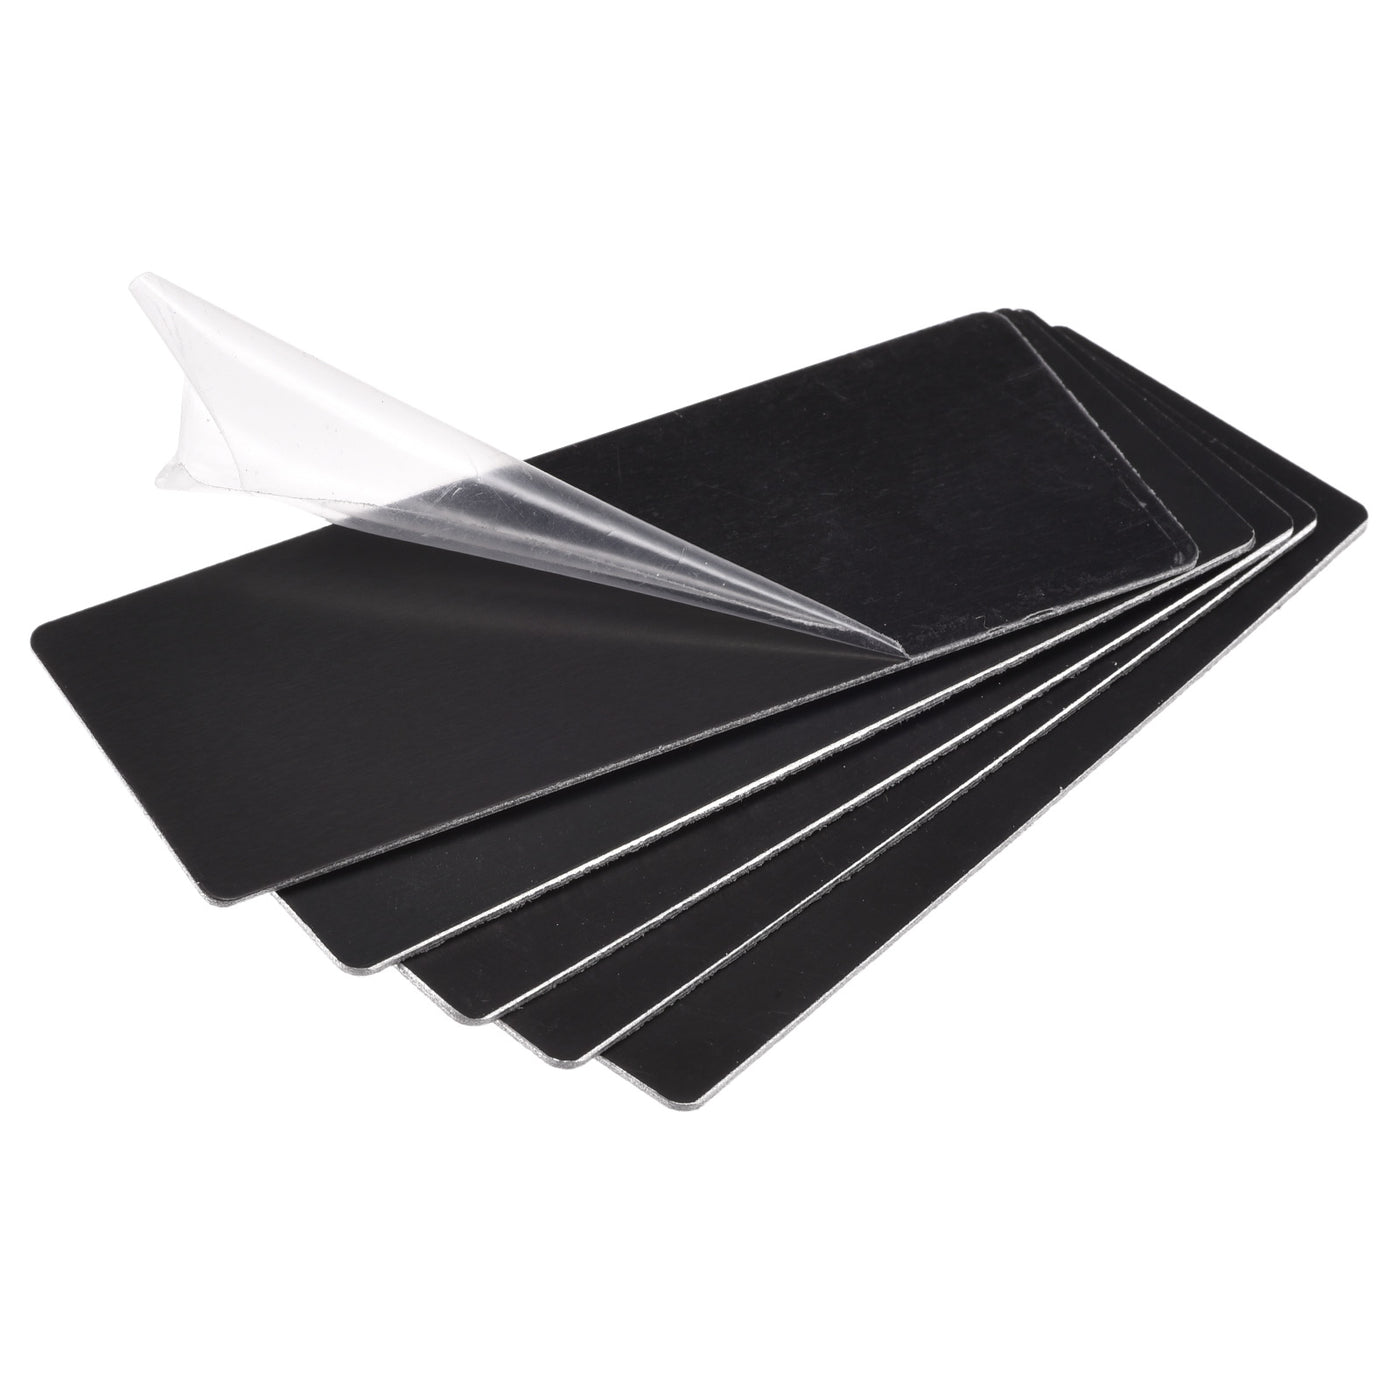 Uxcell Uxcell Blank Metal Card 85mm x 50mm x 0.8mm Anodized Aluminum Plate Black 10 Pcs